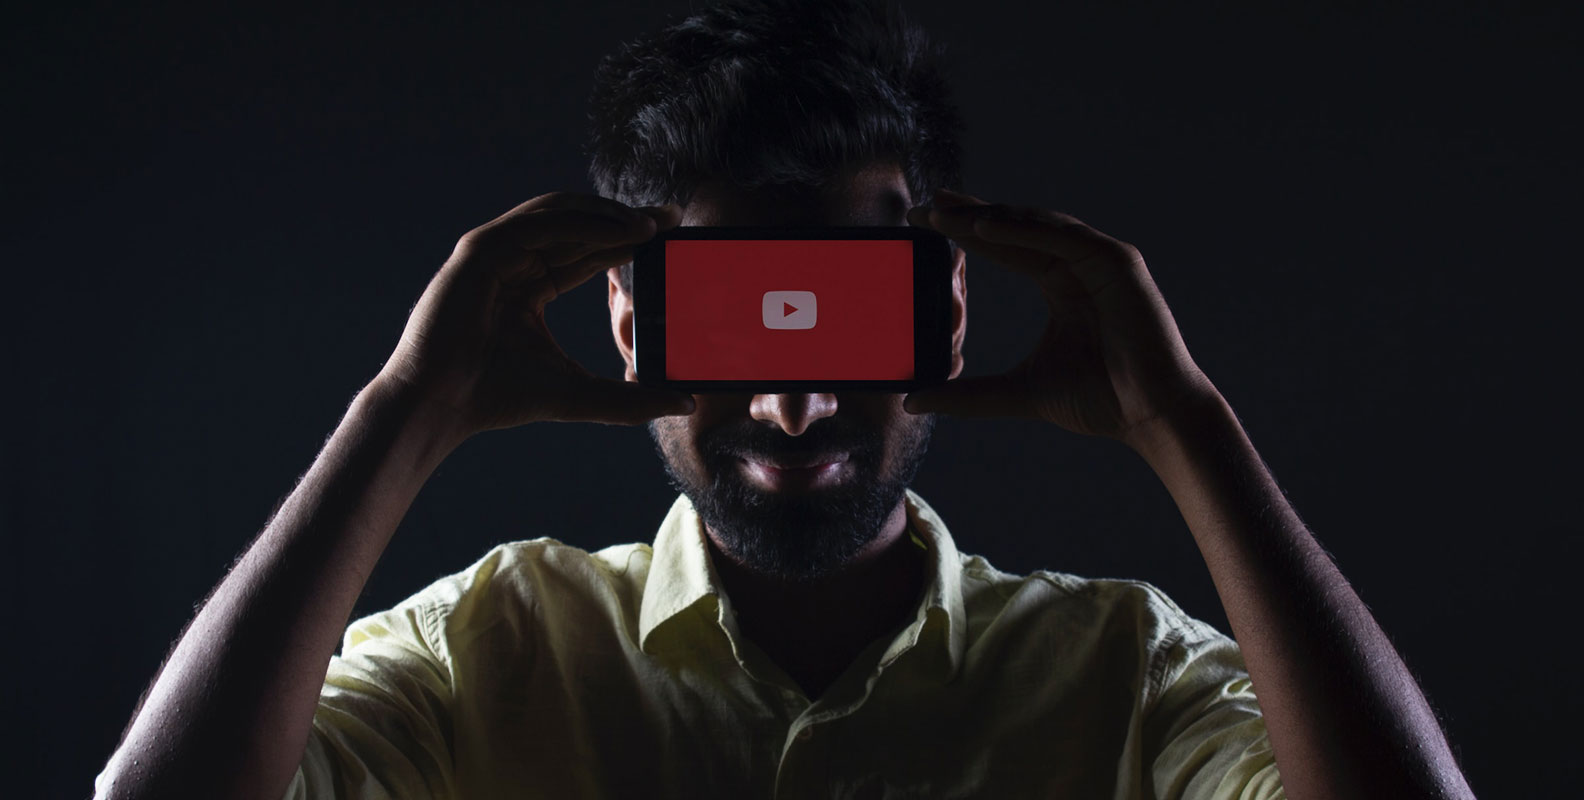 YouTube Logo Showing in Mobile with Eyes Hidden